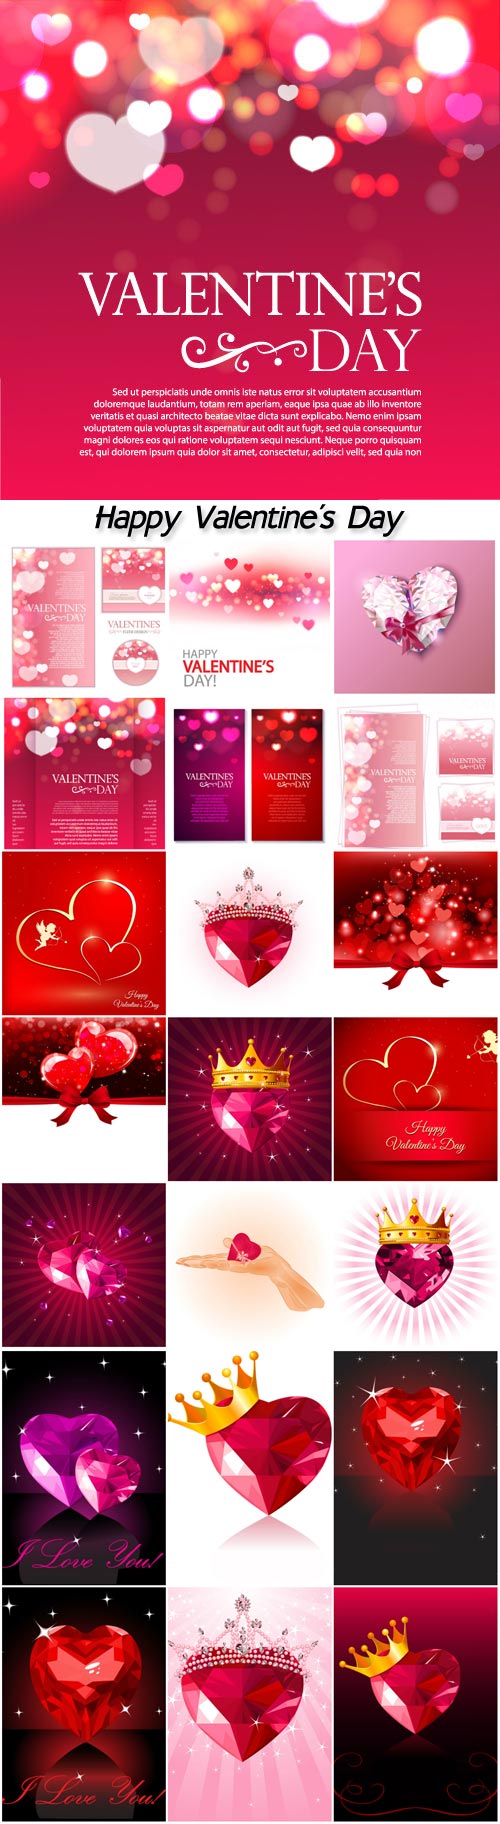 Valentine's day vector background with hearts and red ribbons